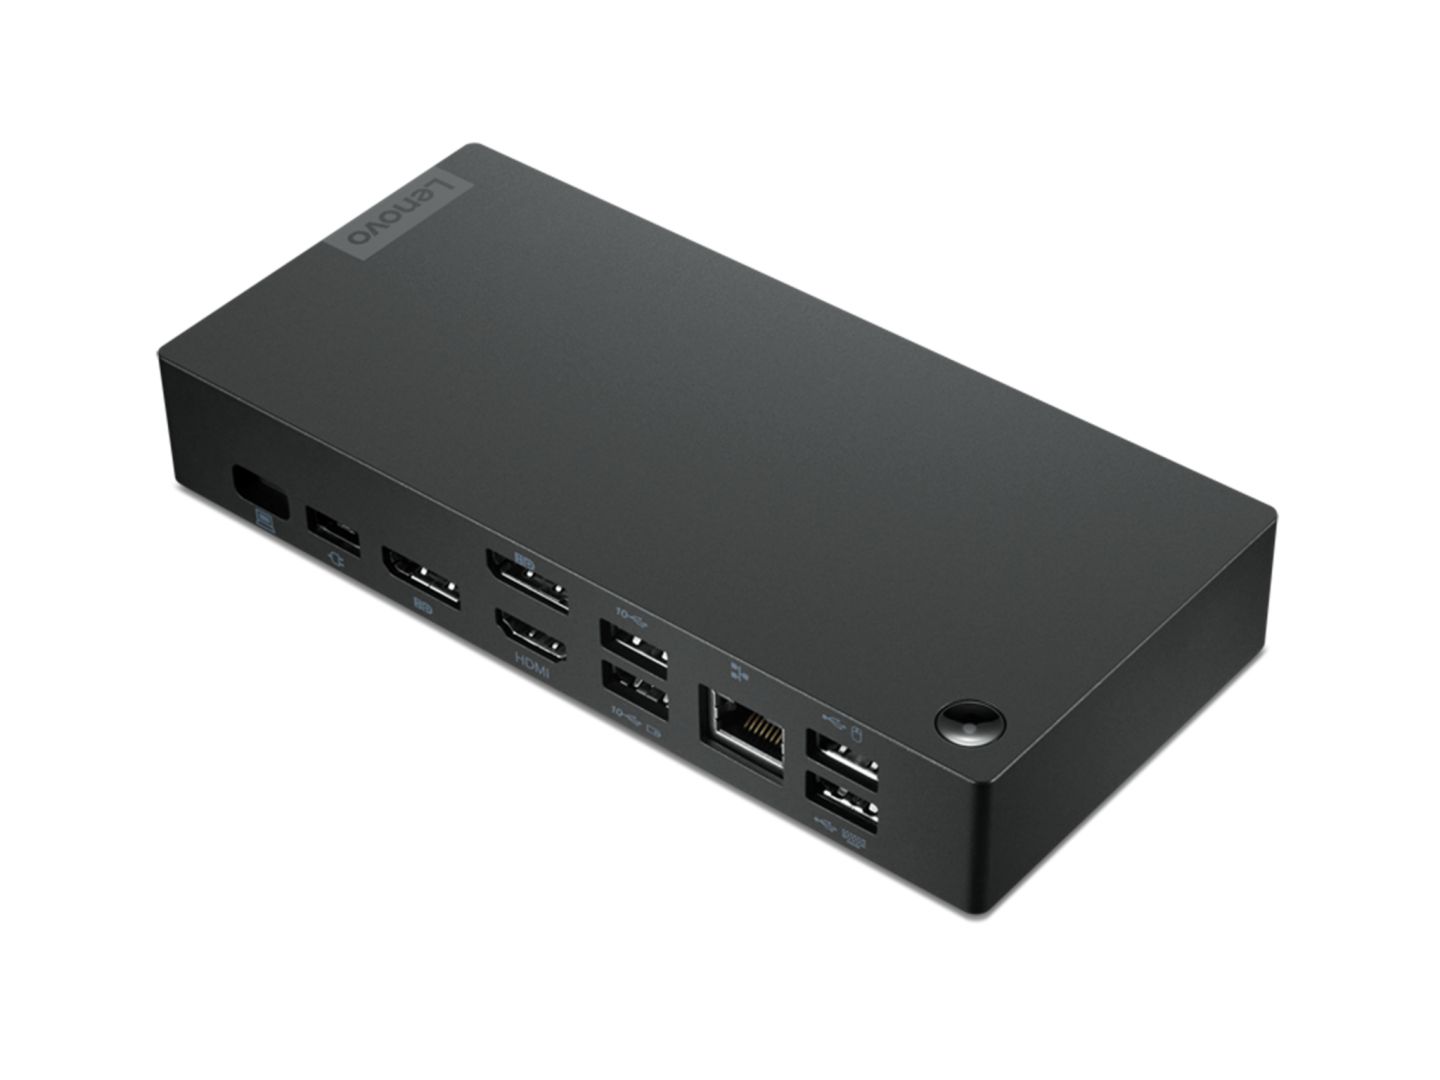 Lenovo USB-C Dock (Windows Only), Video Ports: 2 x Display Port,1 x HDMI Port, Output Power: 65W with 90W power adapter connected_1